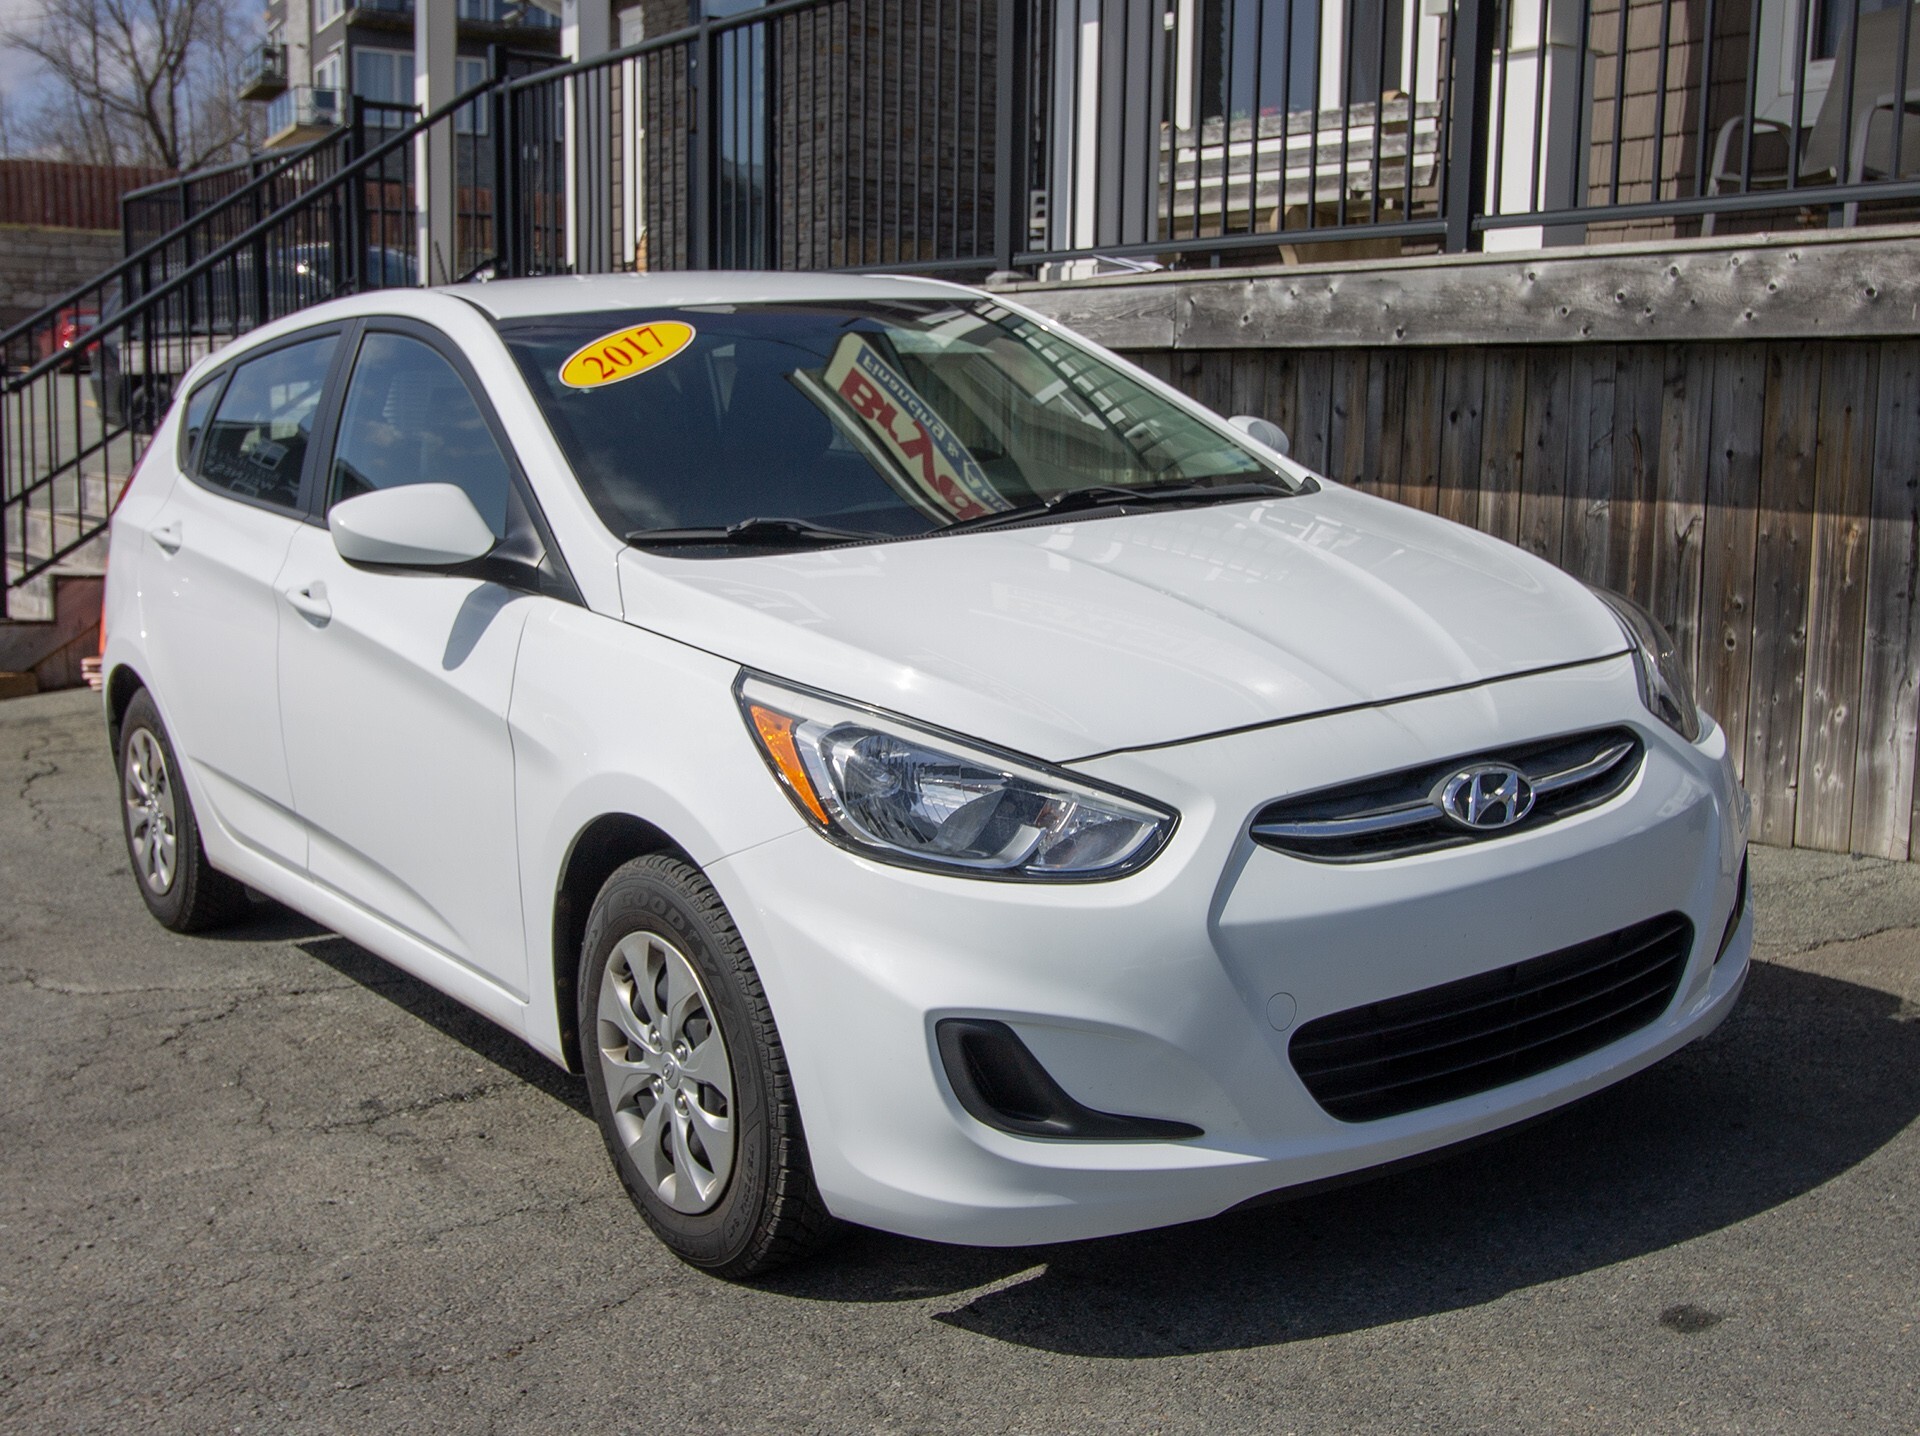 2017 Hyundai Accent 6 SPD MANUAL | EXTRA LOW KMS | FINANCE NOW!